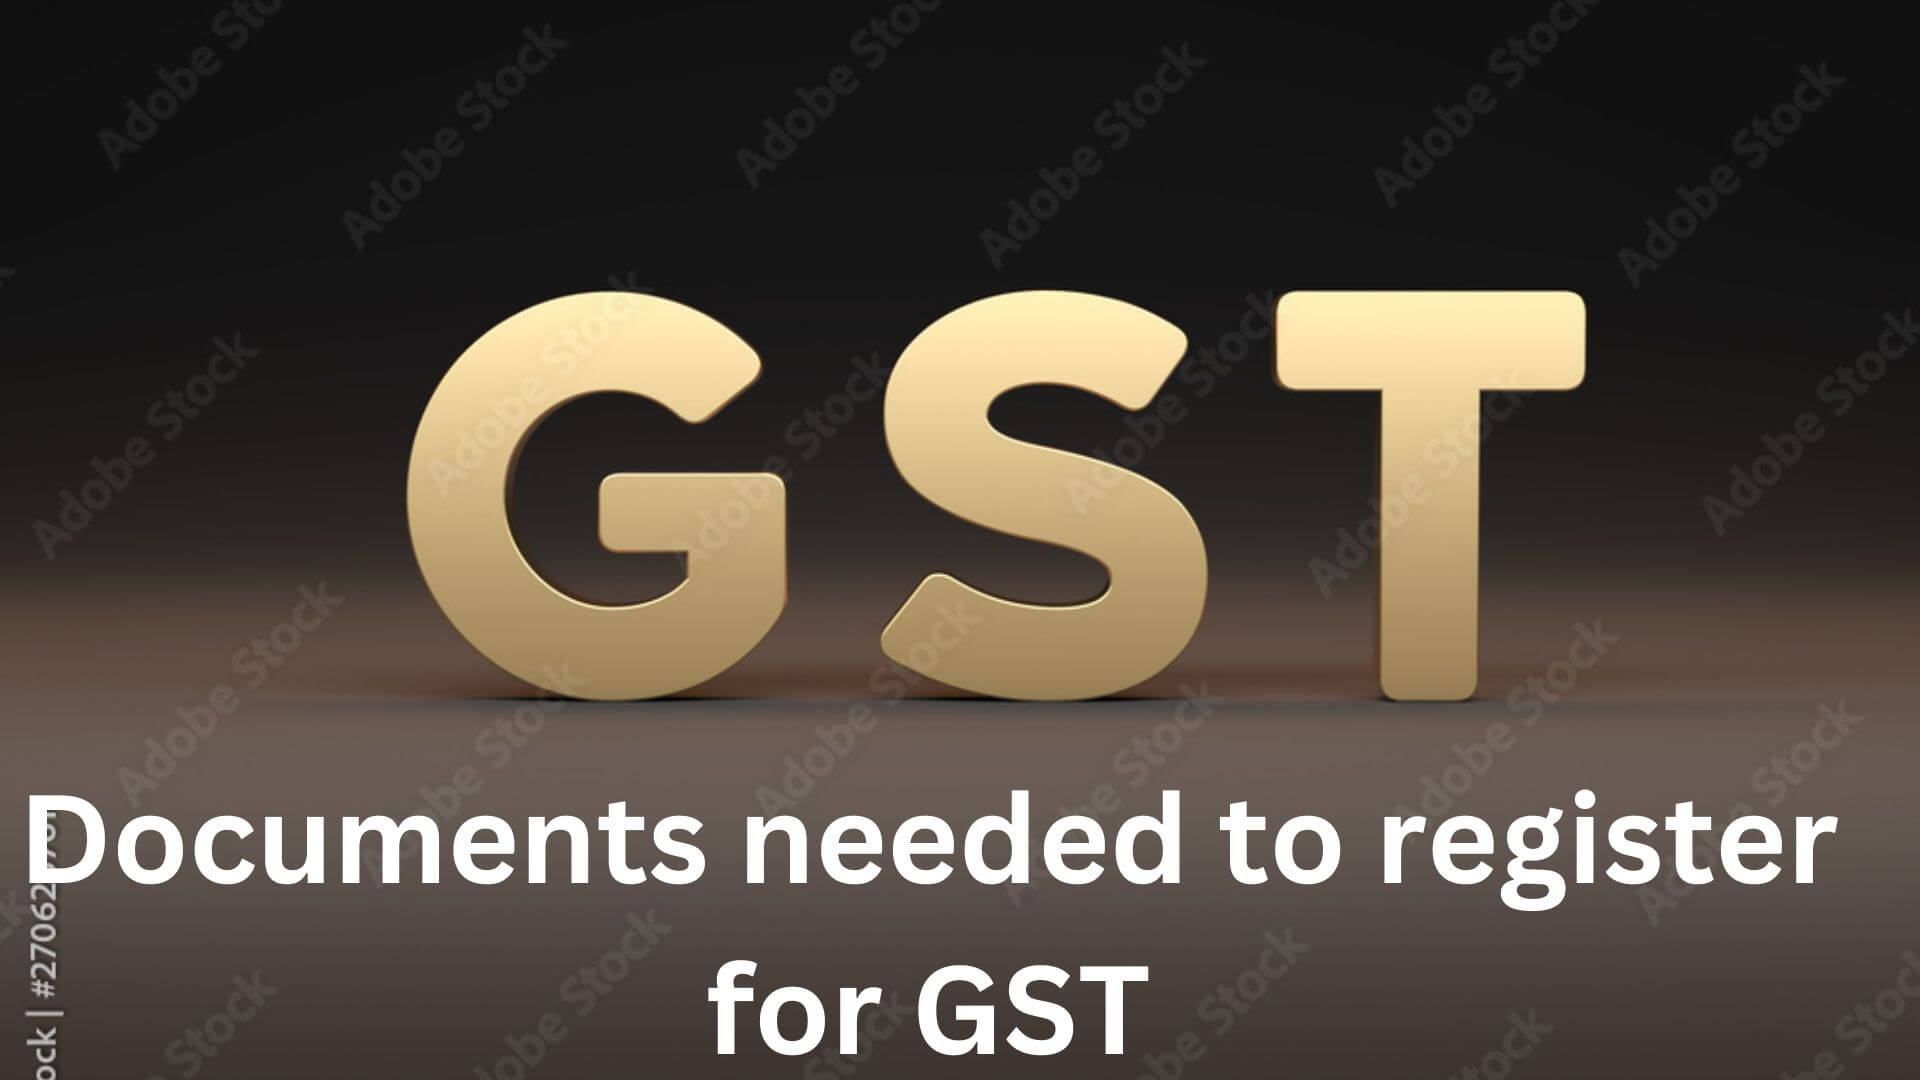 Documents needed to register for GST